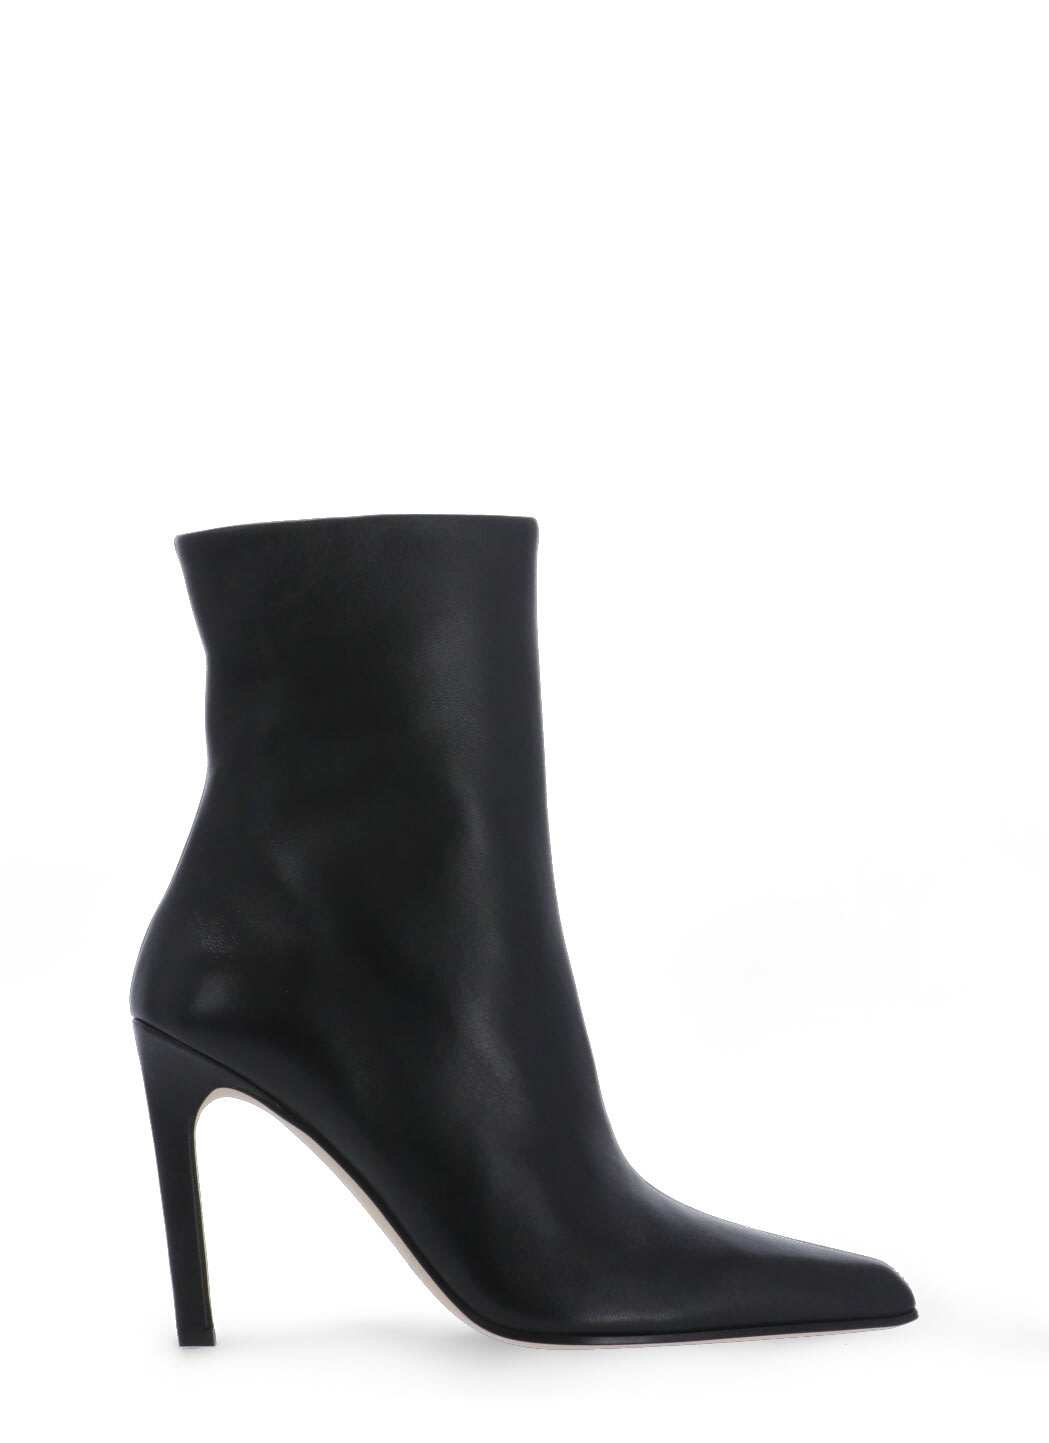 Paris Texas Jude Ankle Boots In Black